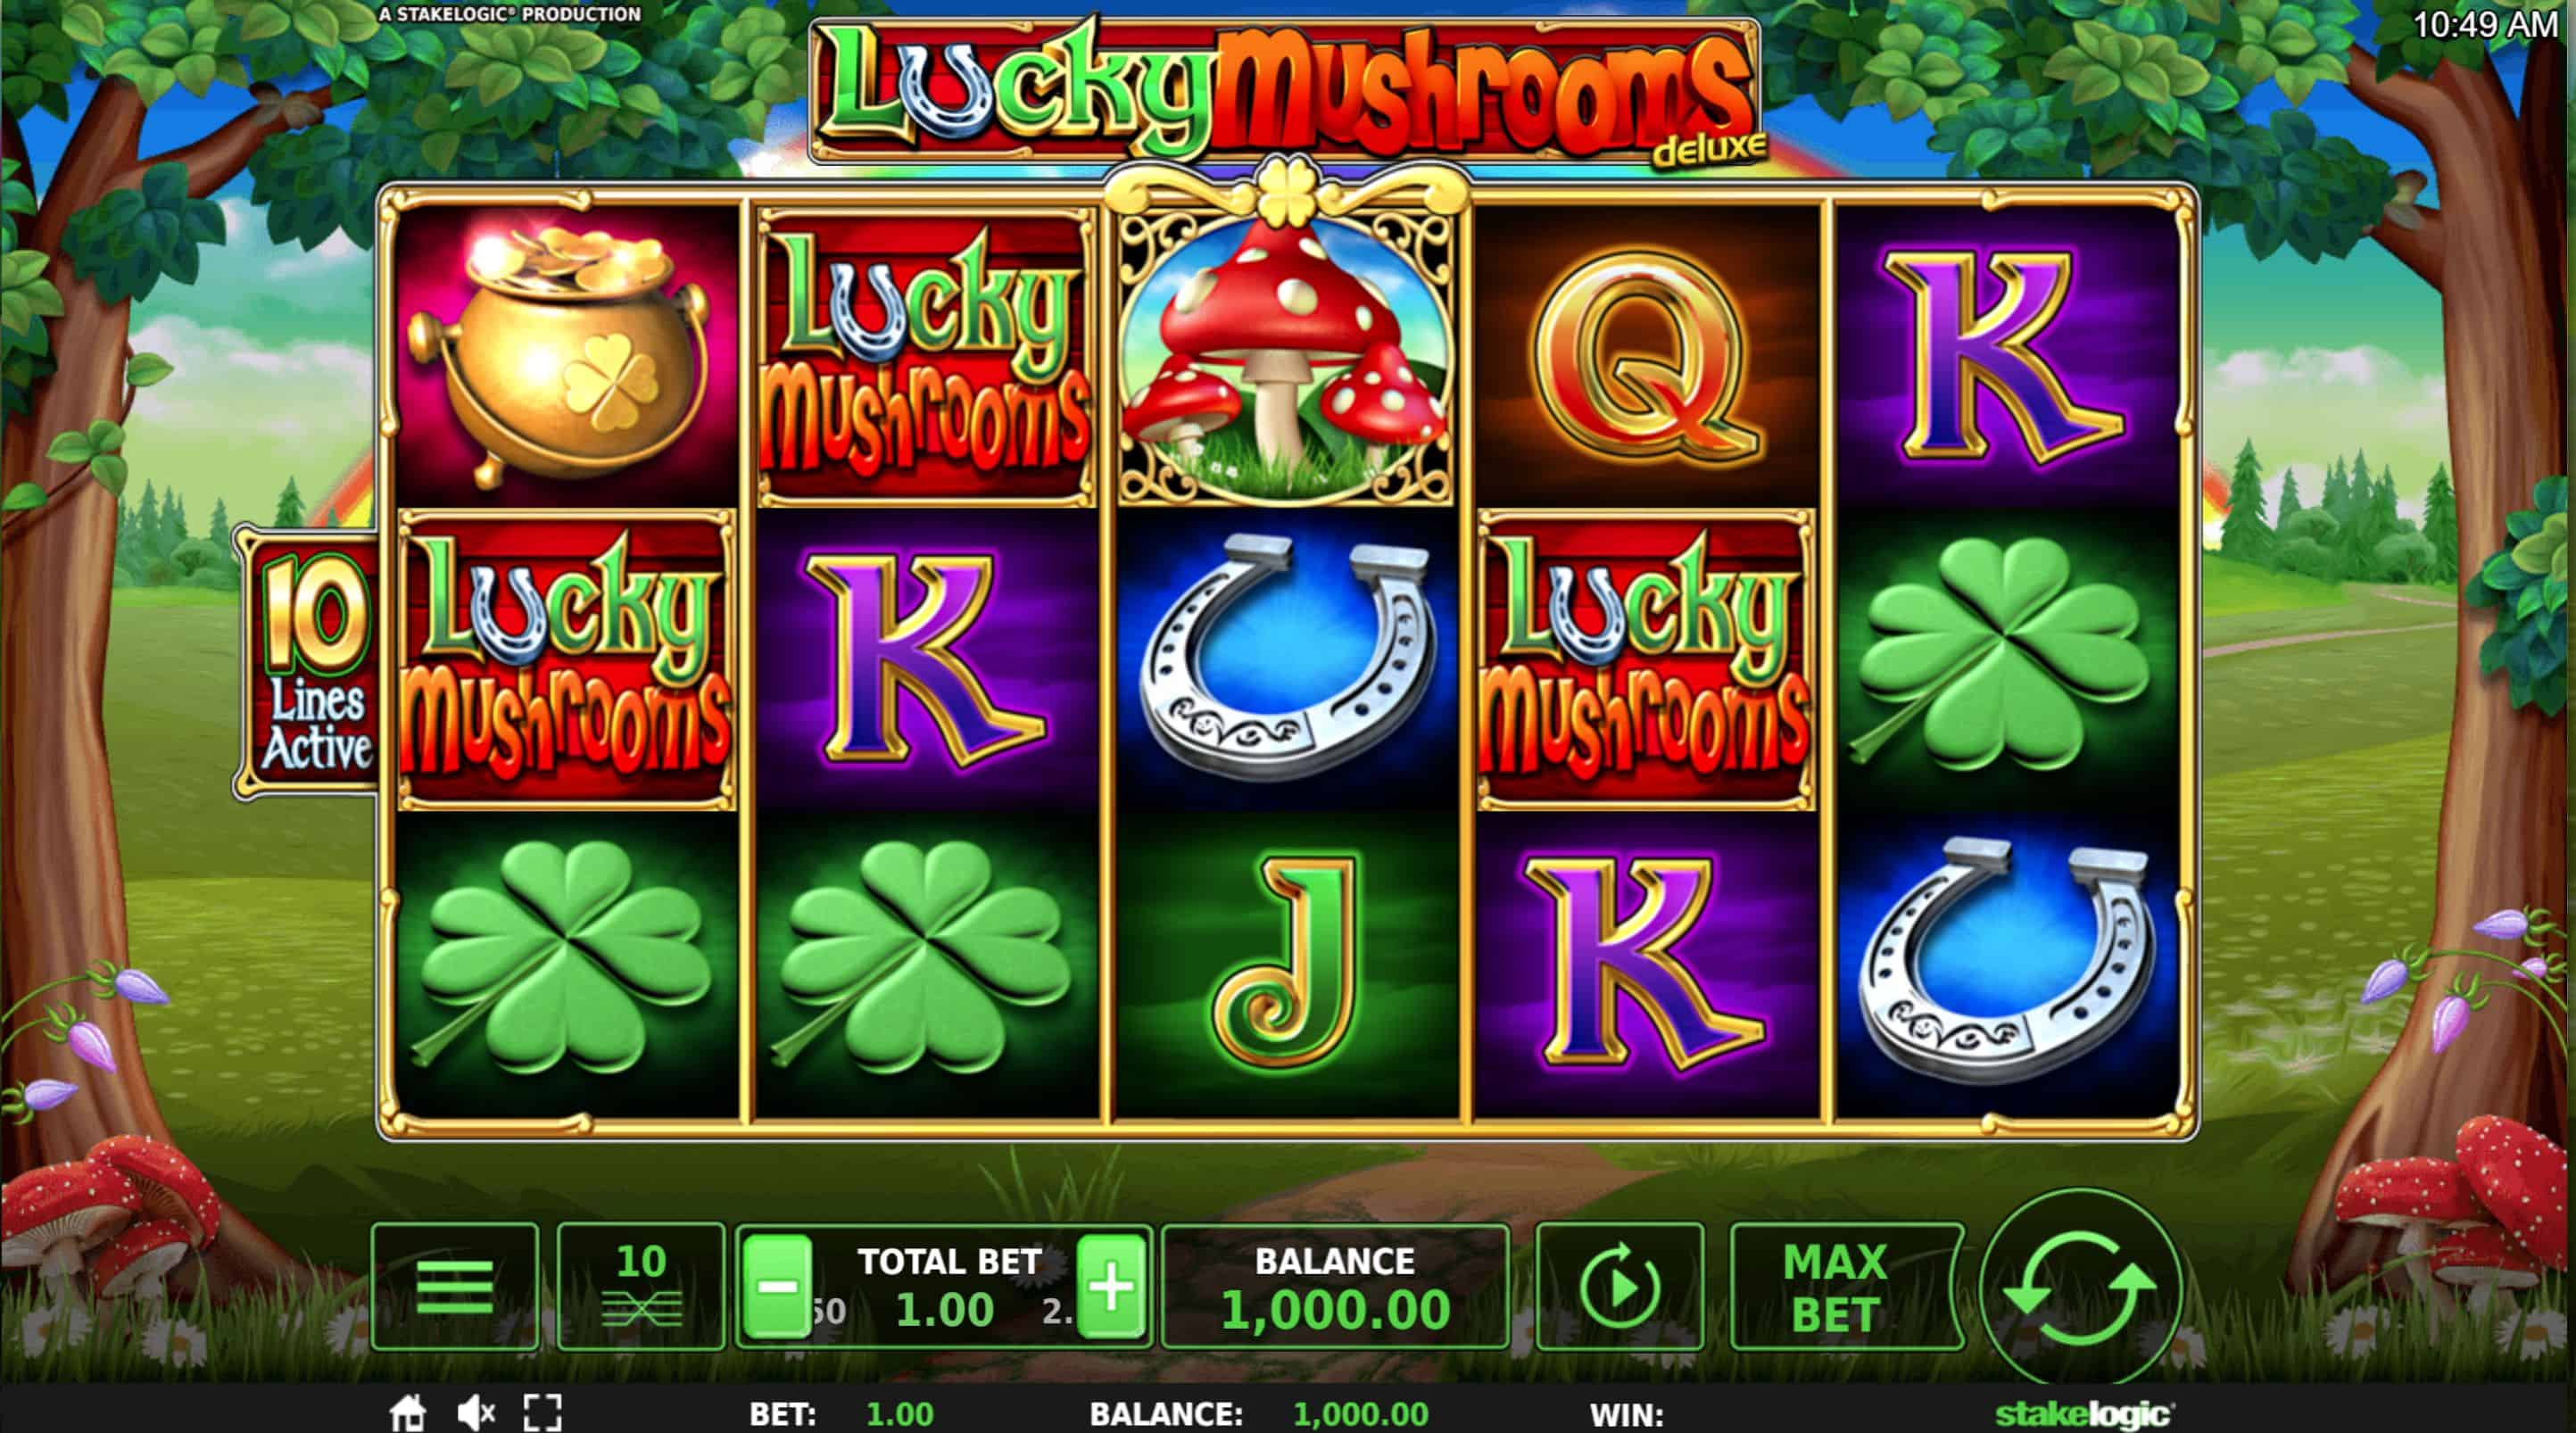 Lucky Mushrooms Deluxe Slot Game Free Play at Casino Ireland 01